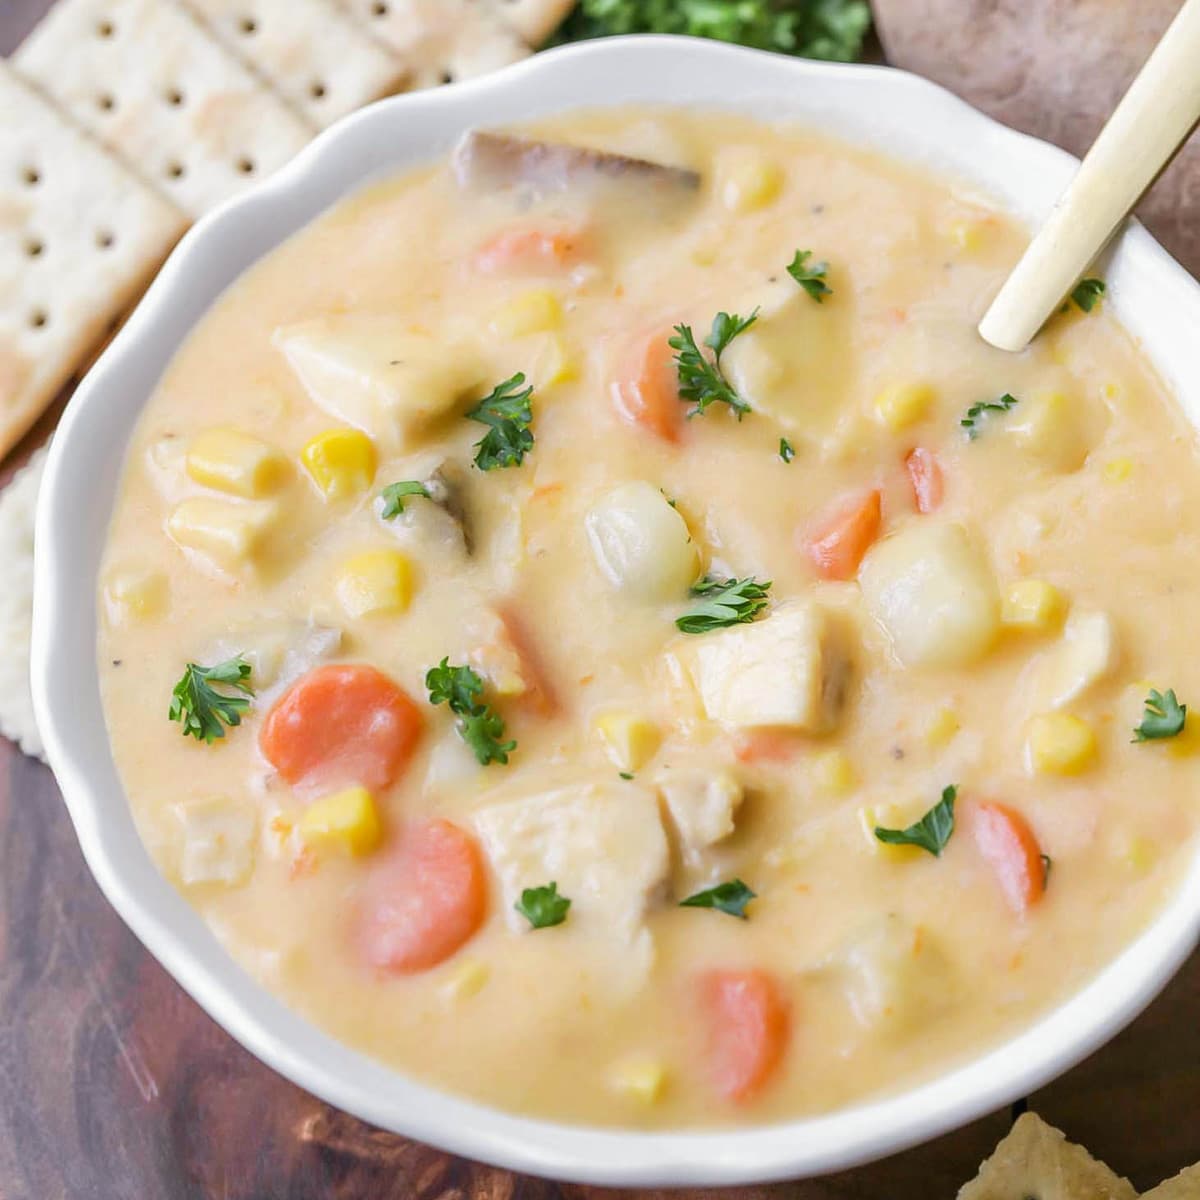 Chicken corn chowder topped with parsley in a white bowl